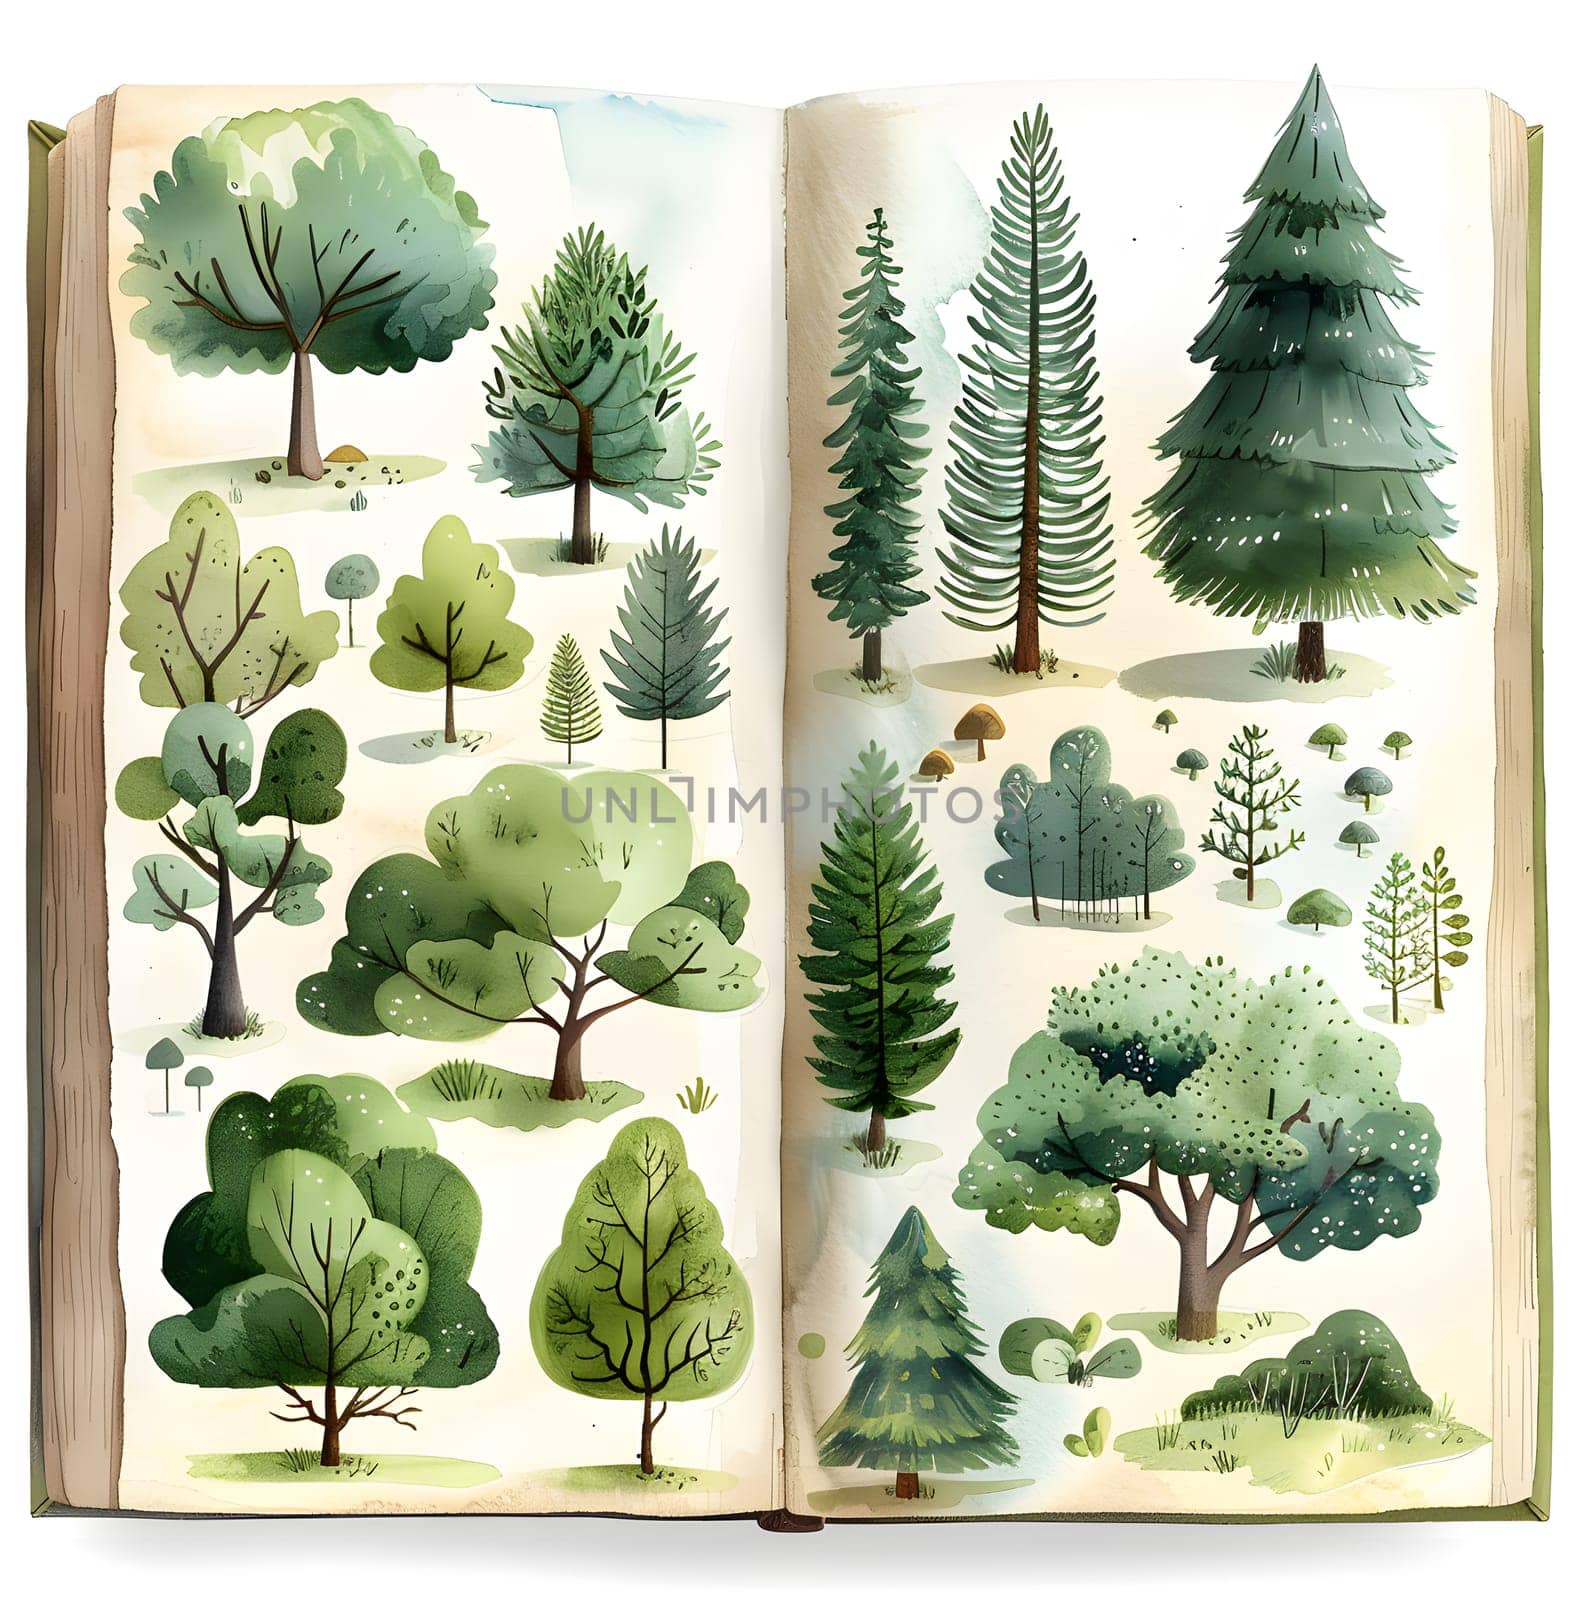 An open book displays a page featuring a lush plant community filled with trees by Nadtochiy